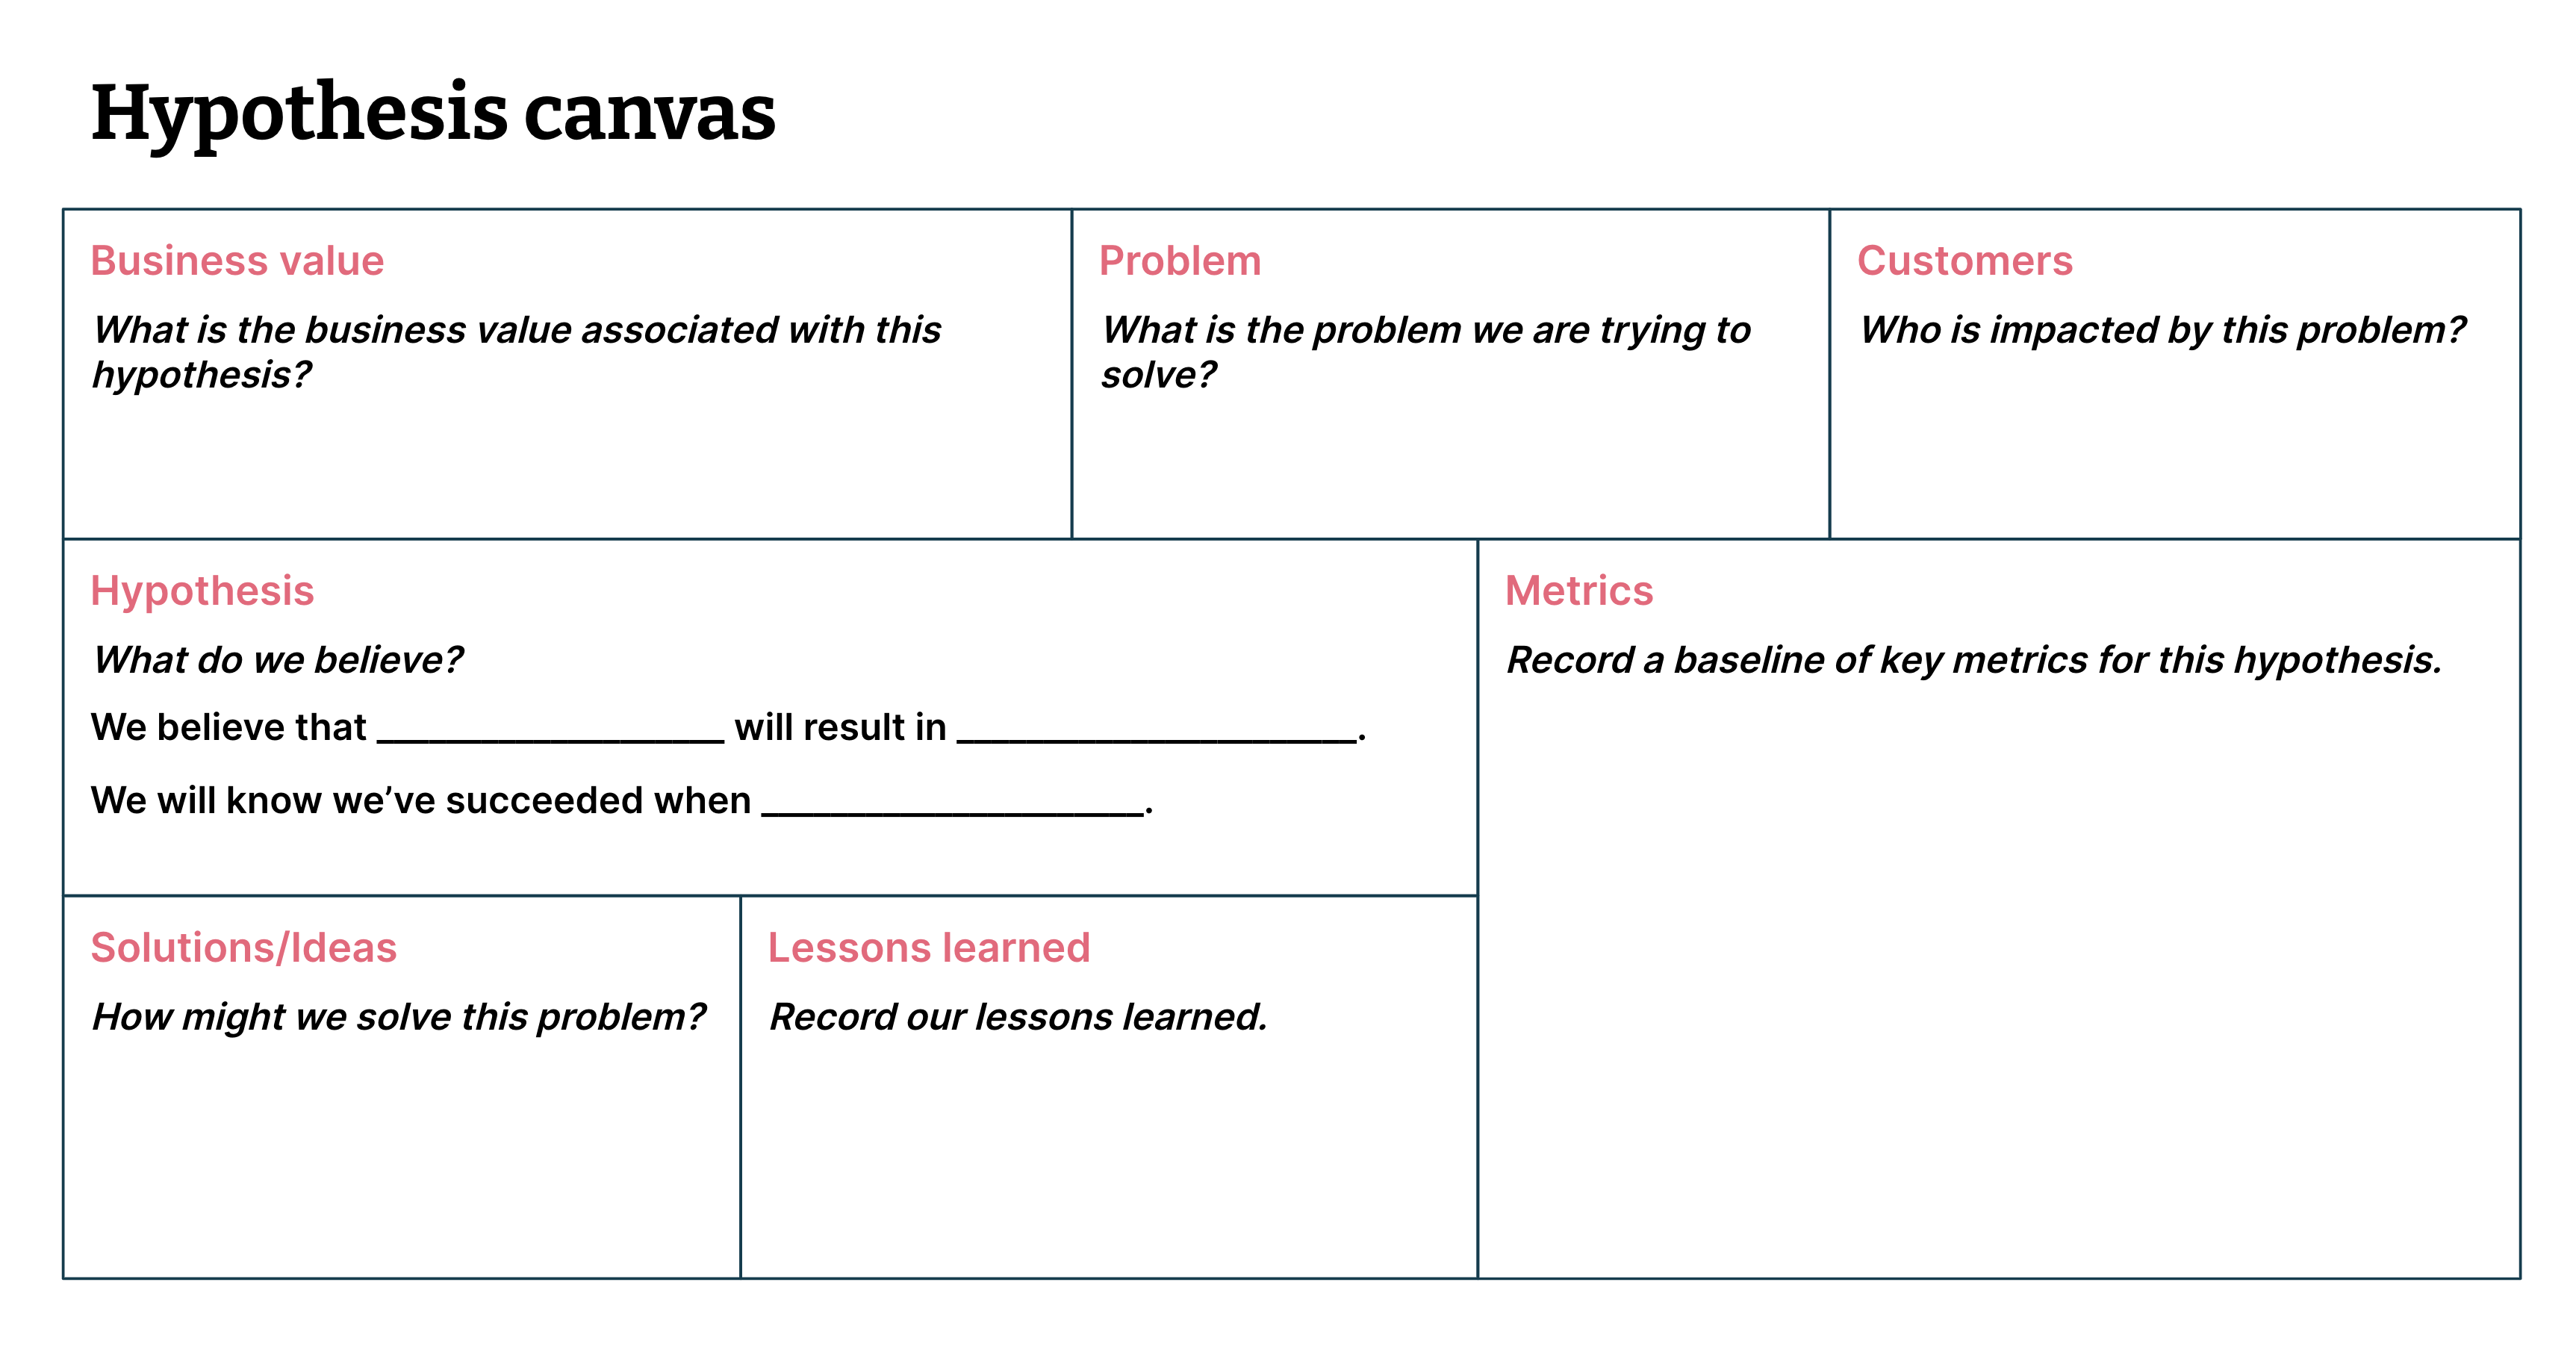 An example of a hypothesis canvas which is a simple matrix made up on questions around the Business value, the Problem, the Customers, the Hypothesis, the Metrics, the Solutions or Ideas, and Lessons Learned